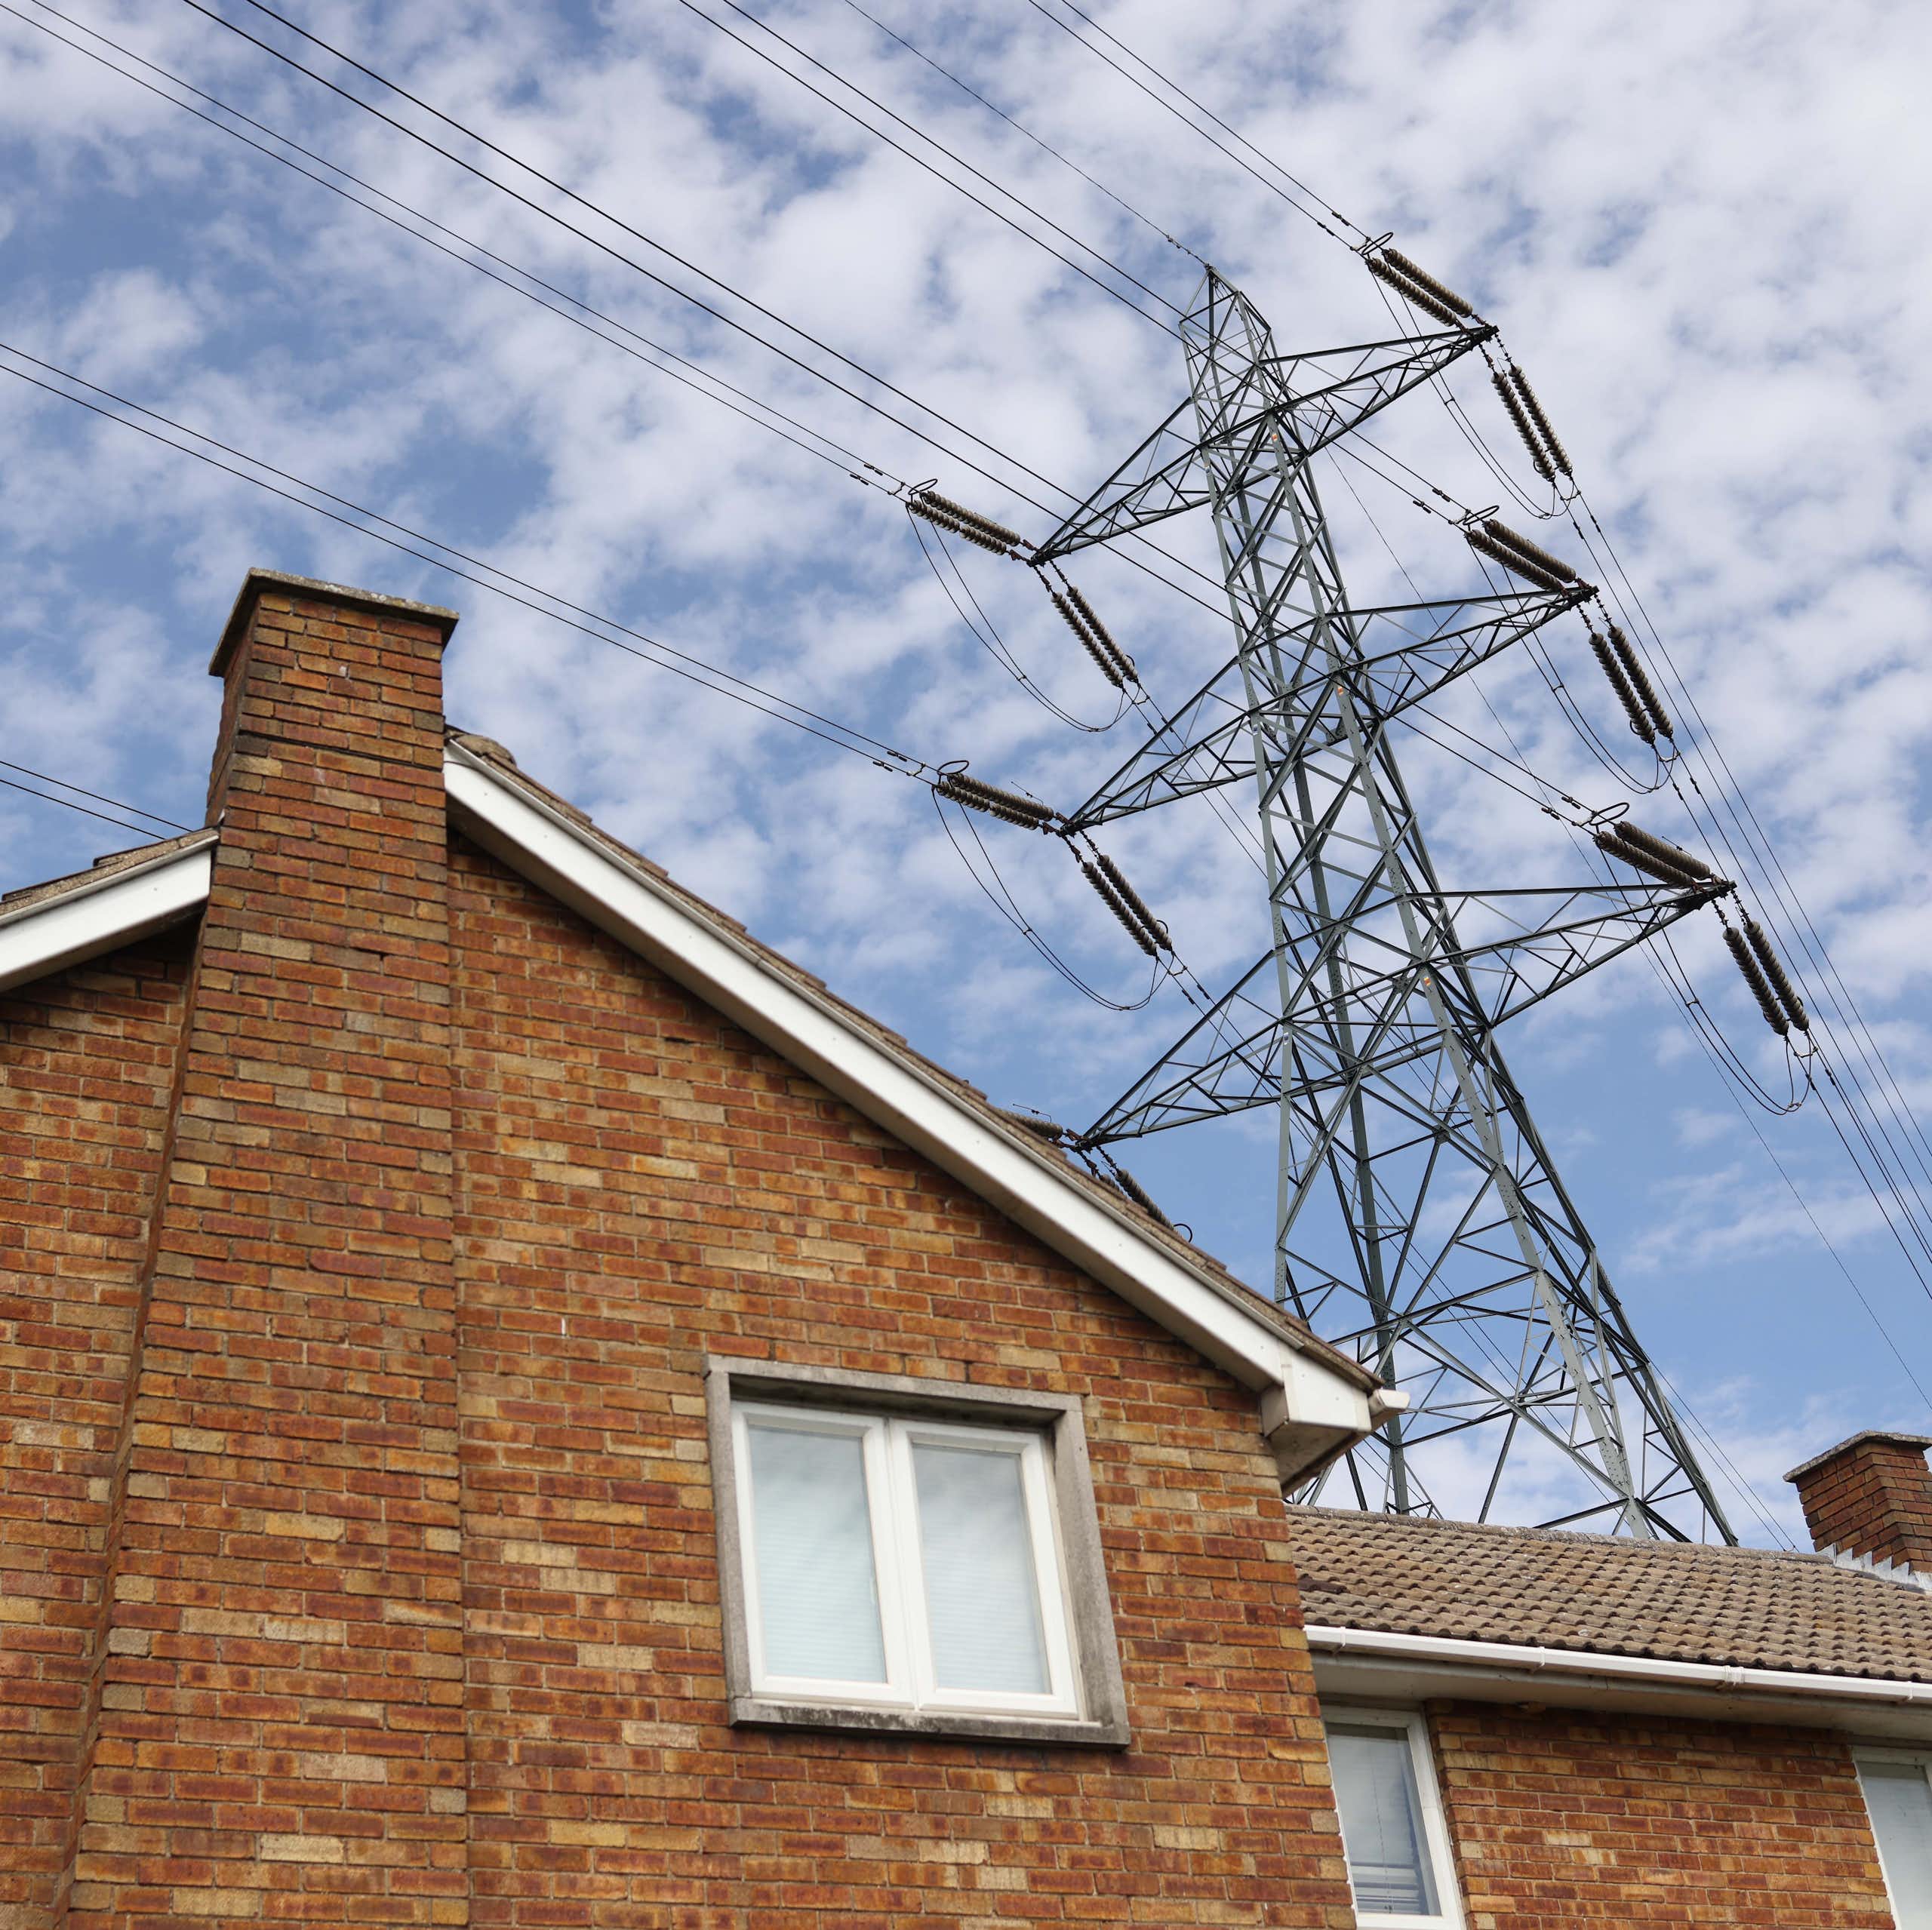 An electricity pylon towers over a house.